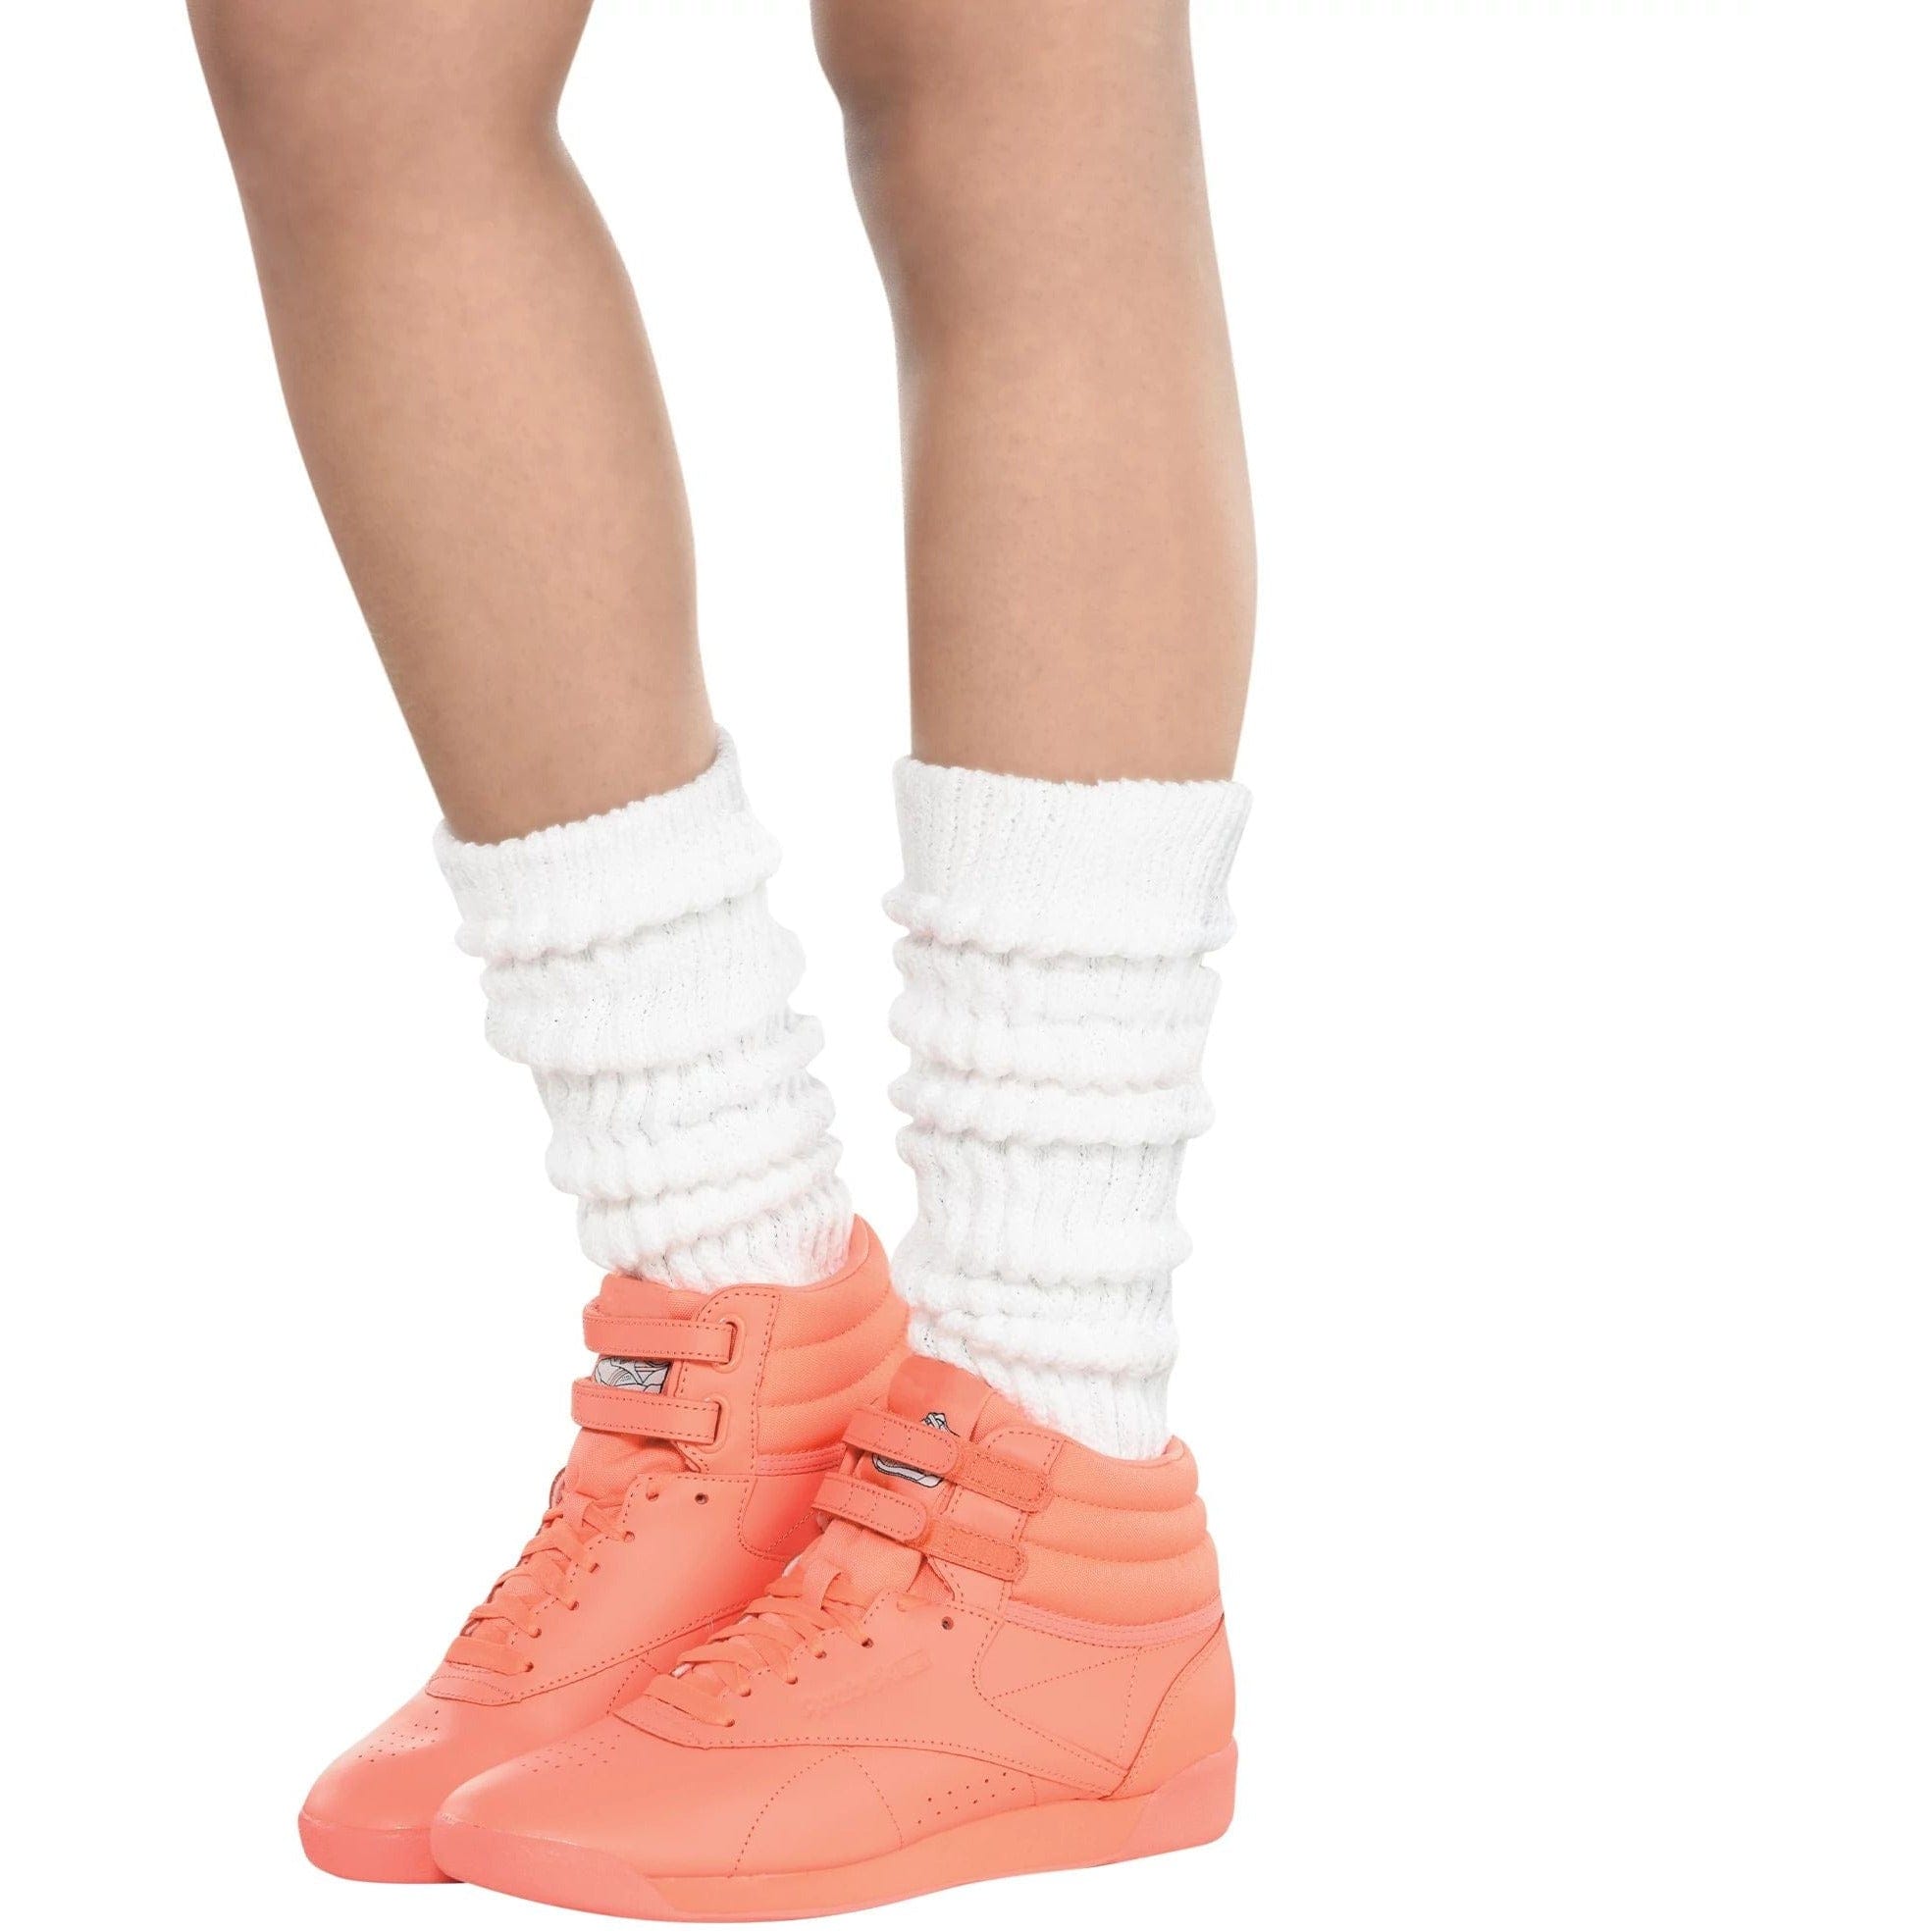 Amscan COSTUMES: ACCESSORIES Slouchy Socks